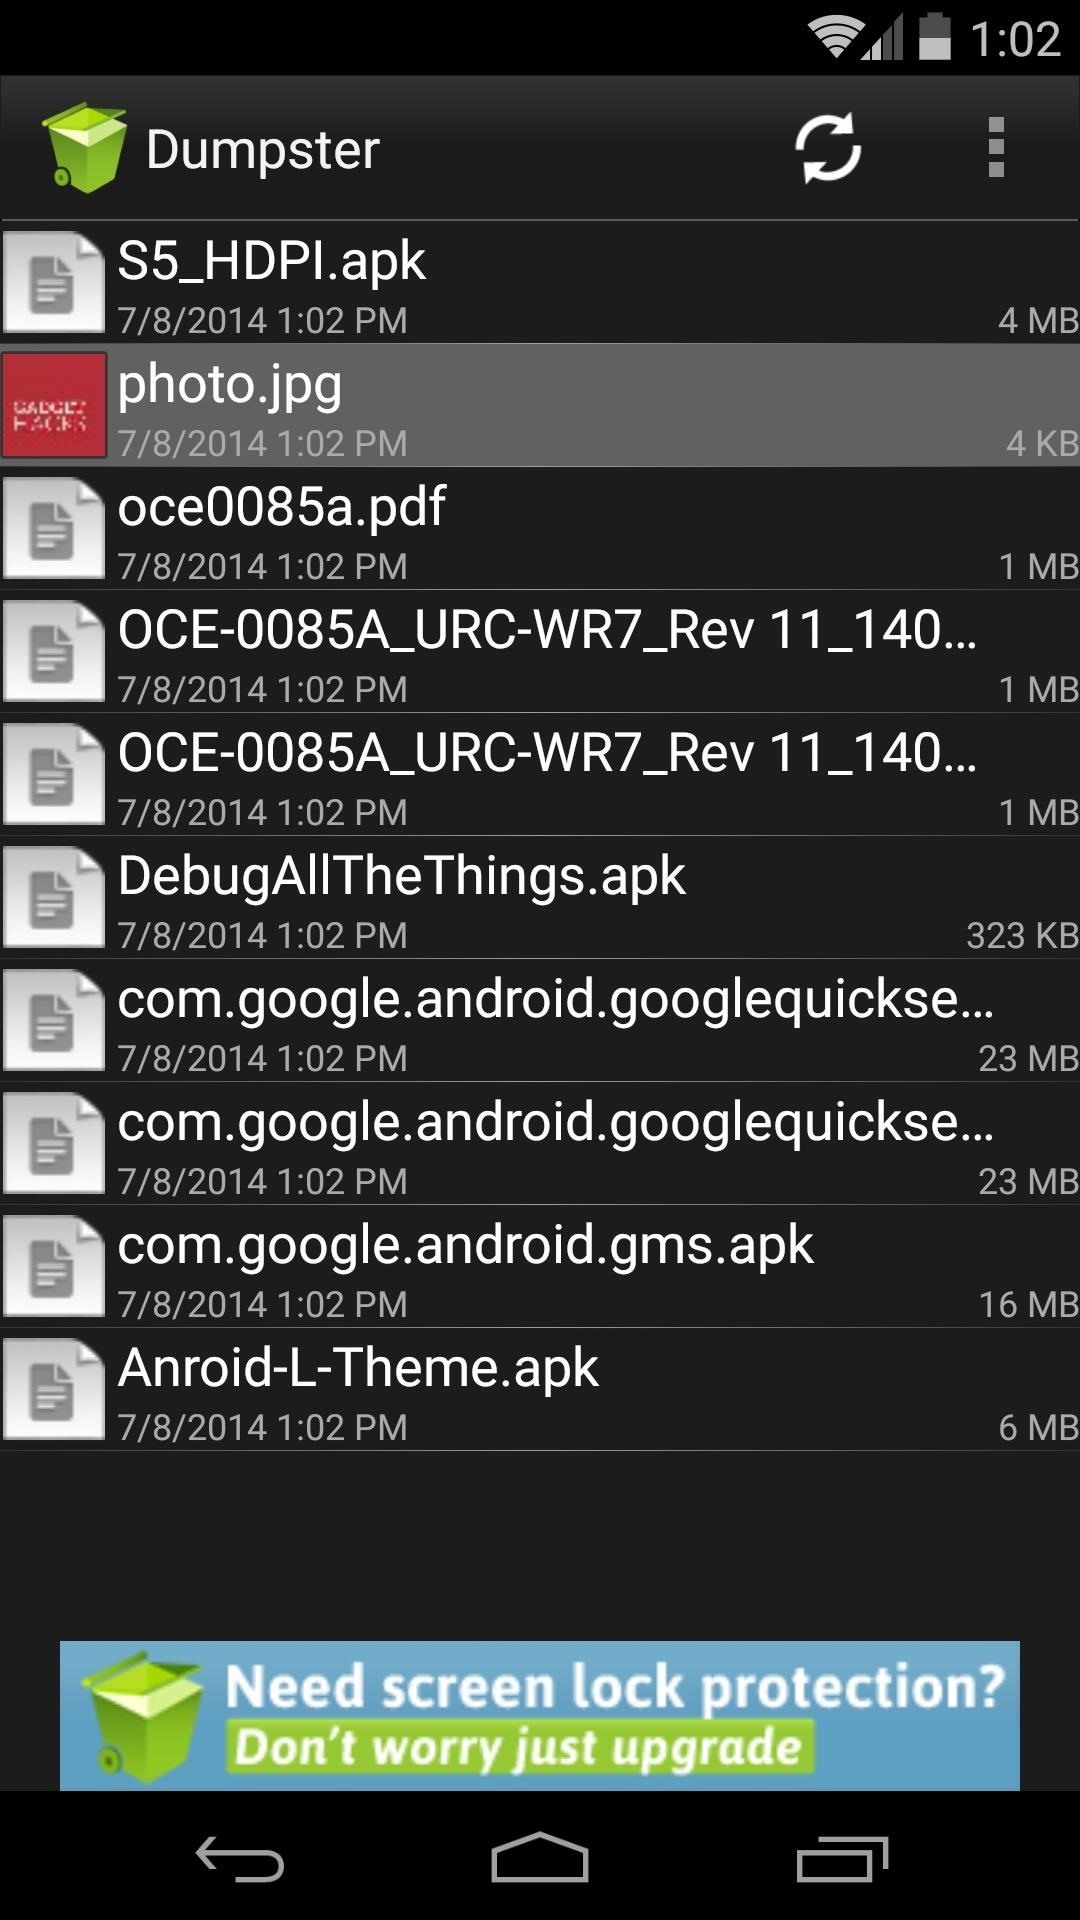 How to Add a "Recycle Bin" to Your Nexus 5 for Easier File Recovery